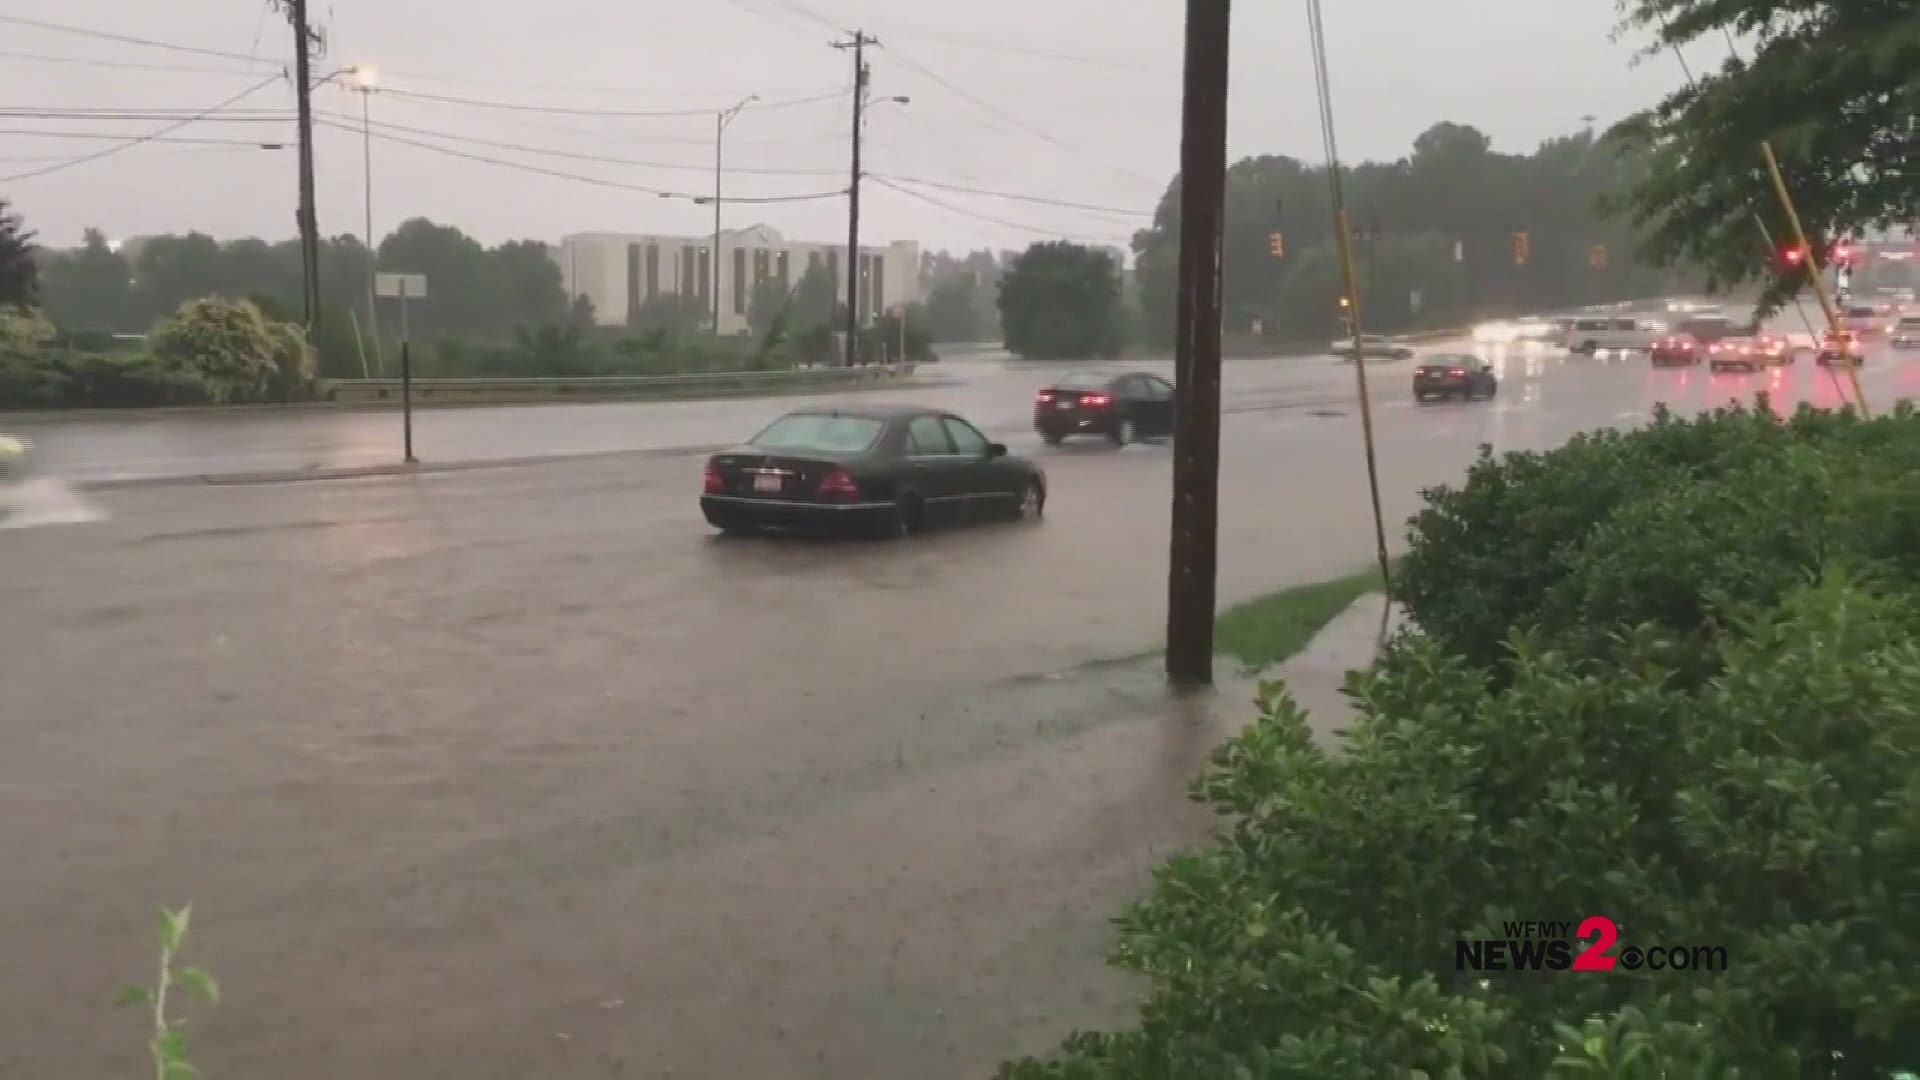 Storms and heavy rain brought flash flooding to the Triad Wednesday evening.